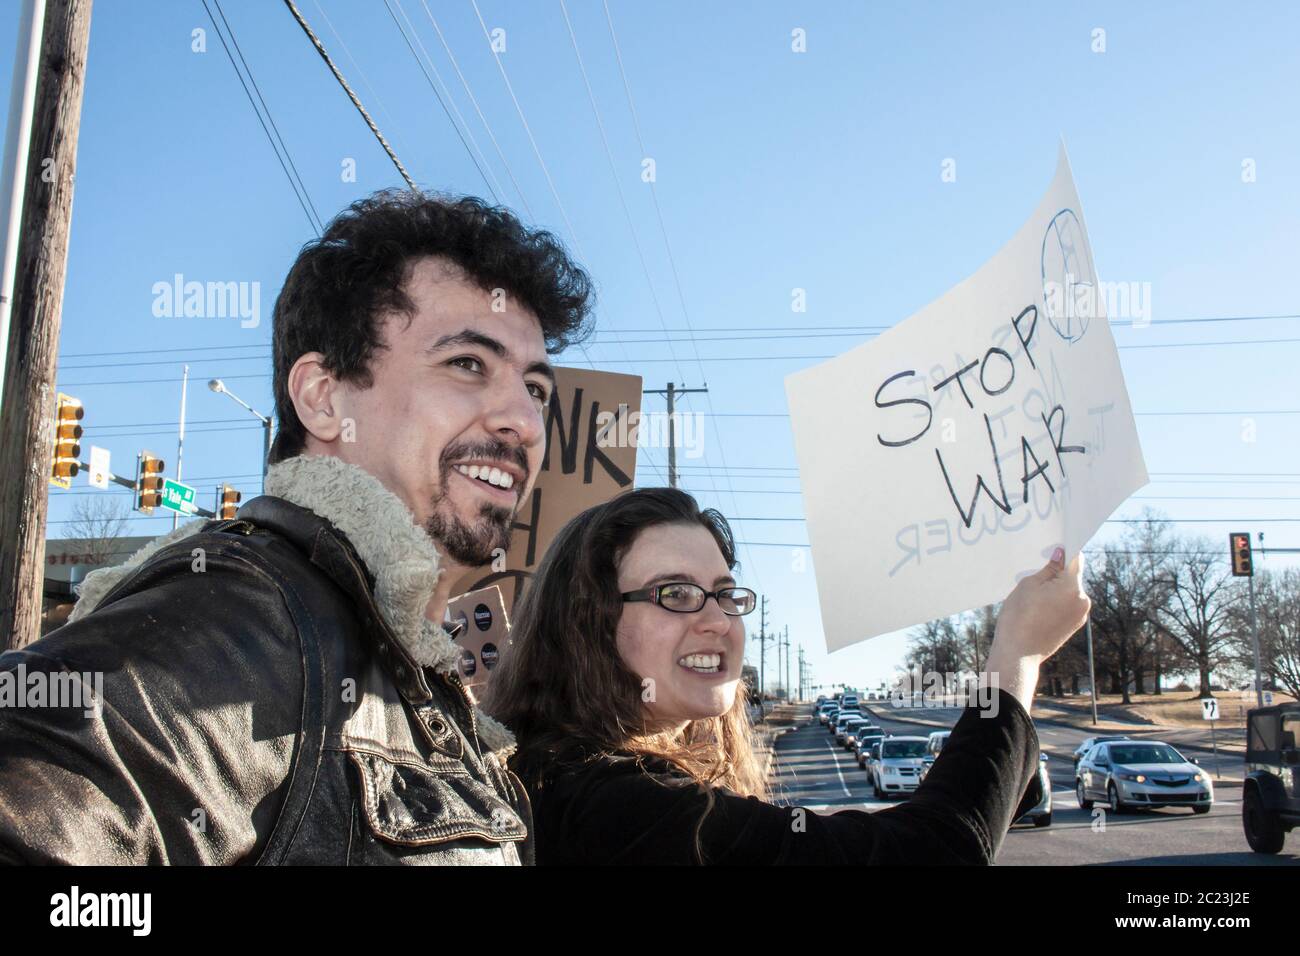 01-04-2010 Tulsa USA - Two smiling young people with a Stop War sign standing by city intersection with traffic Stock Photo